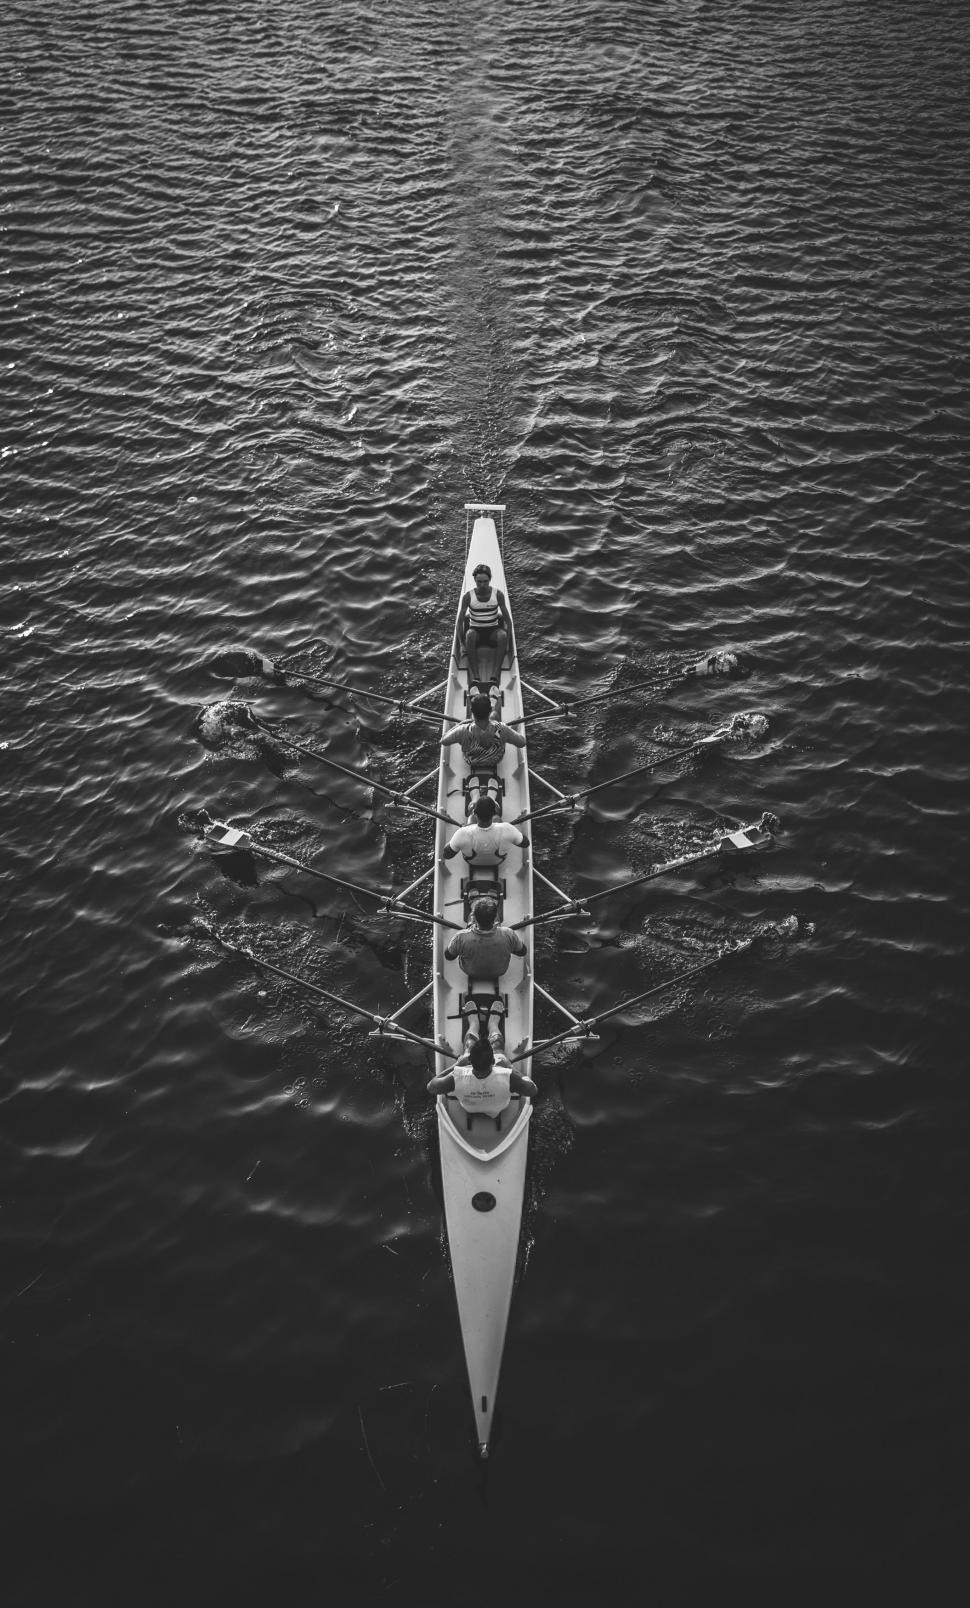 Free Image of Boat Sailing on Open Water 